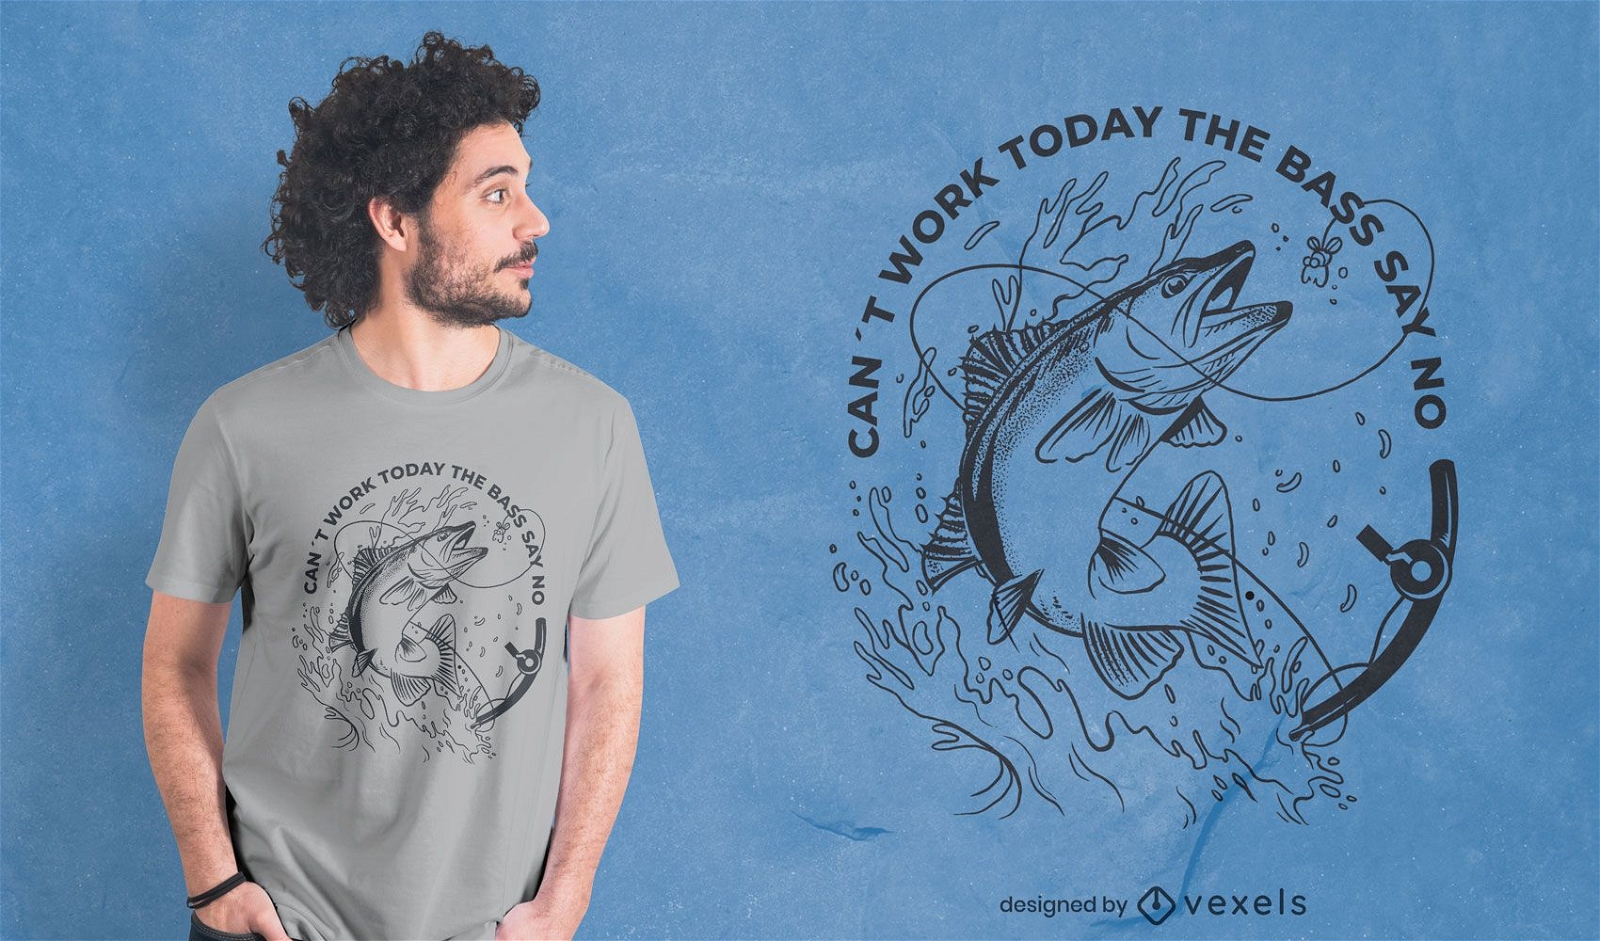 Can't work today fishing quote t-shirt design